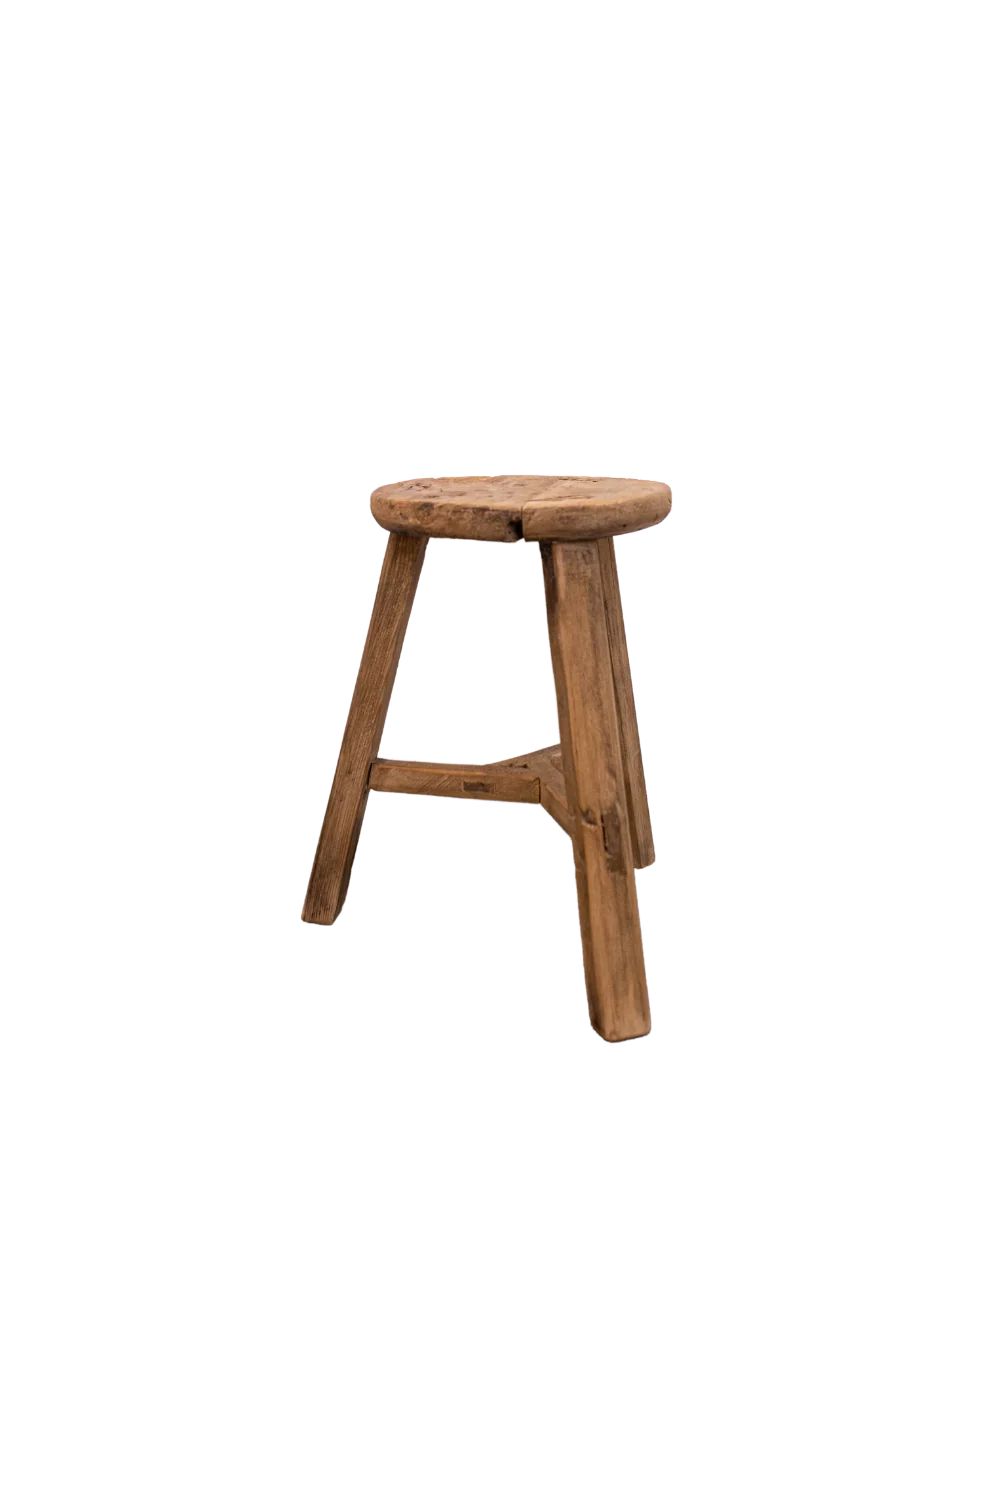 Vintage Elm Wood Round Stool | Luxe B Co